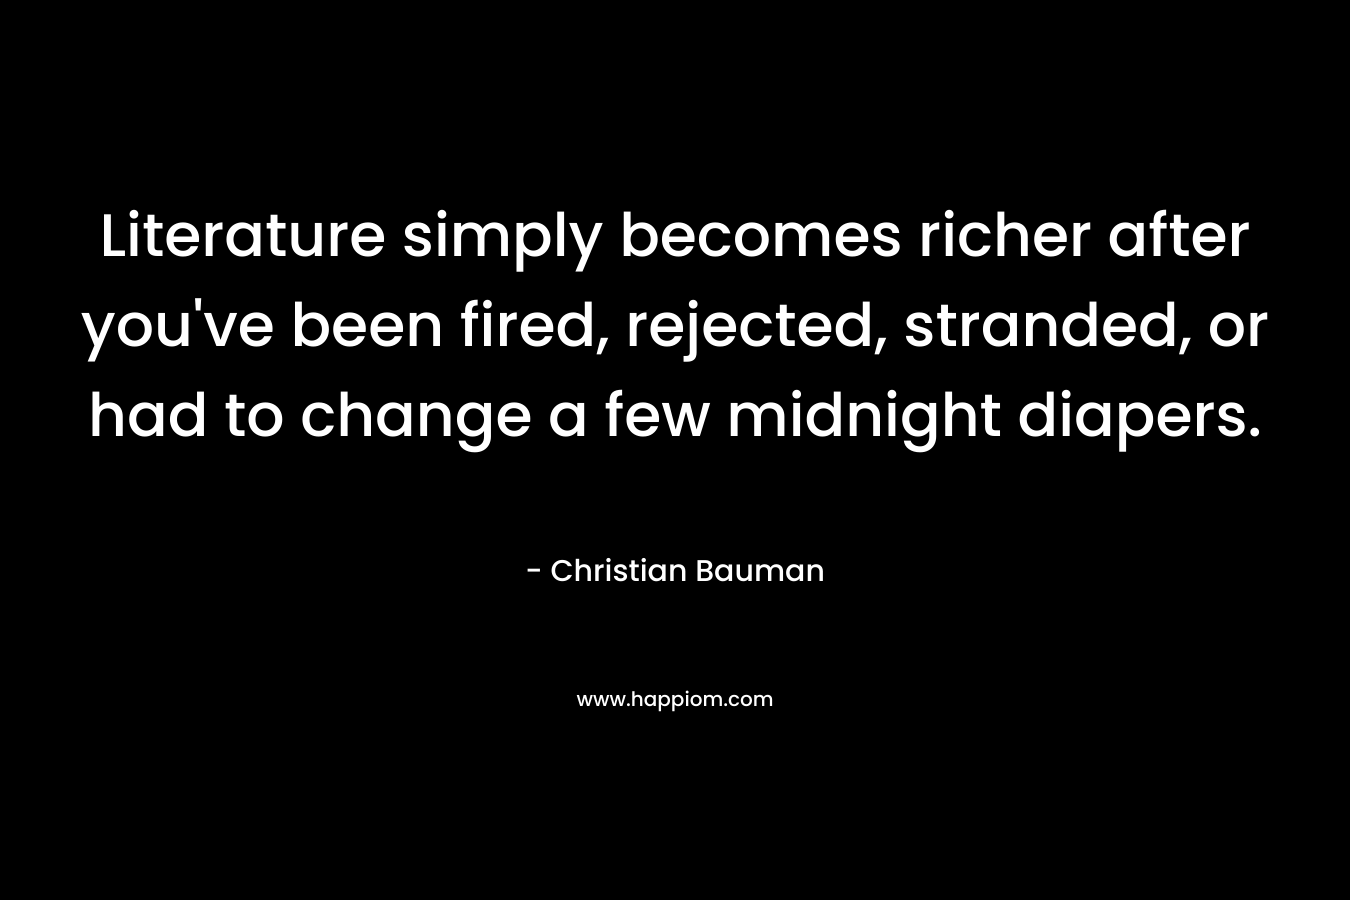 Literature simply becomes richer after you’ve been fired, rejected, stranded, or had to change a few midnight diapers. – Christian Bauman